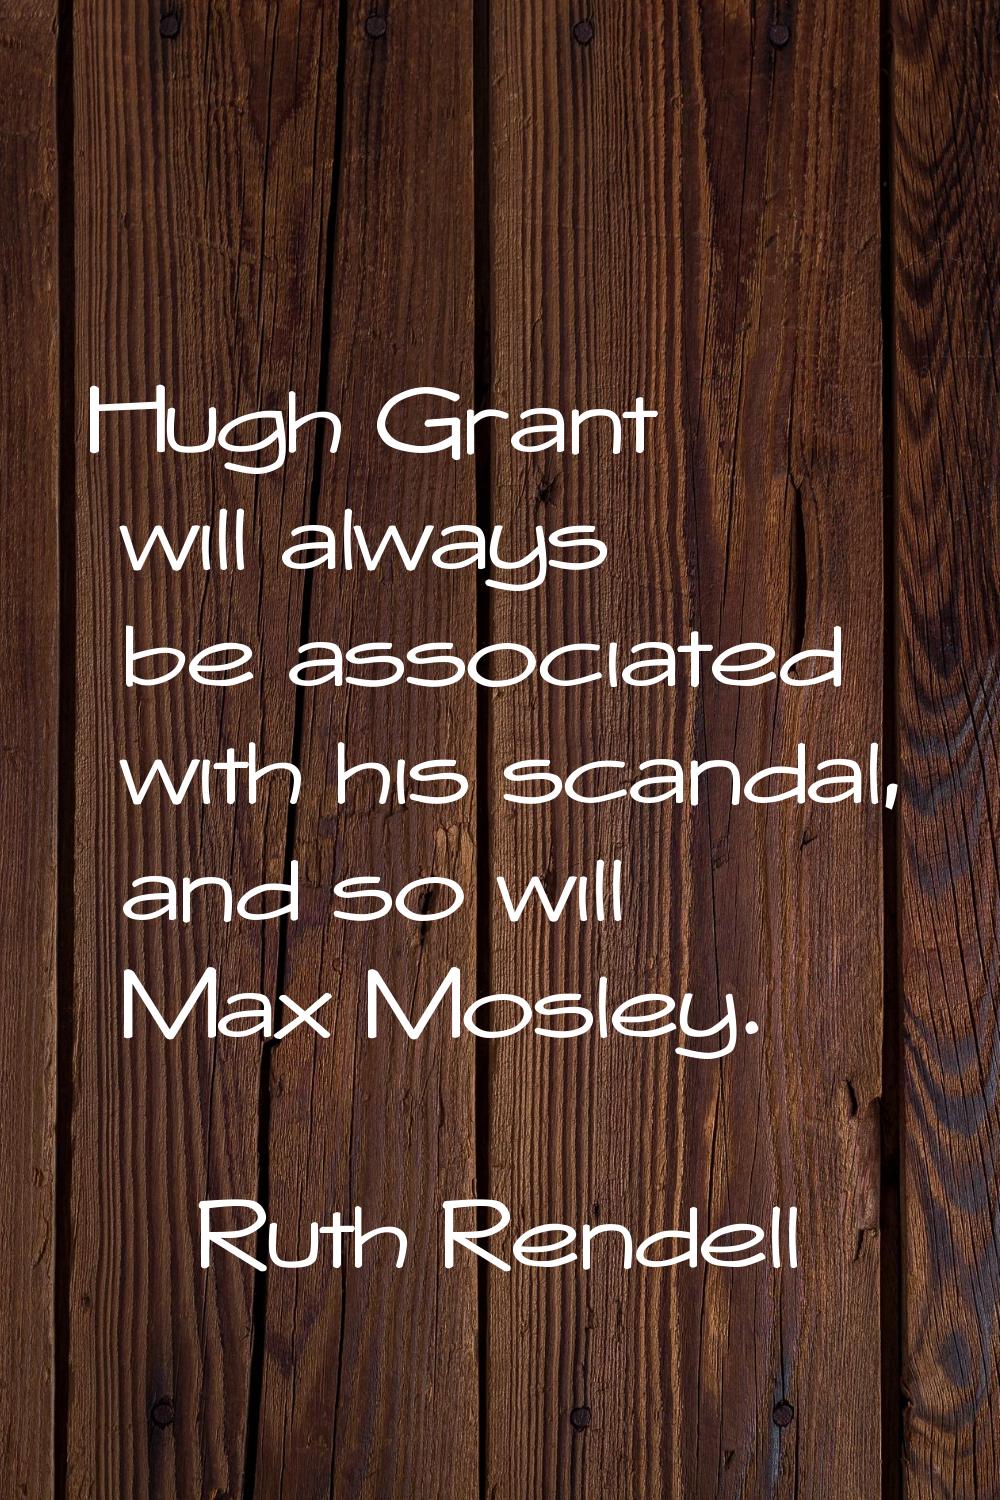 Hugh Grant will always be associated with his scandal, and so will Max Mosley.